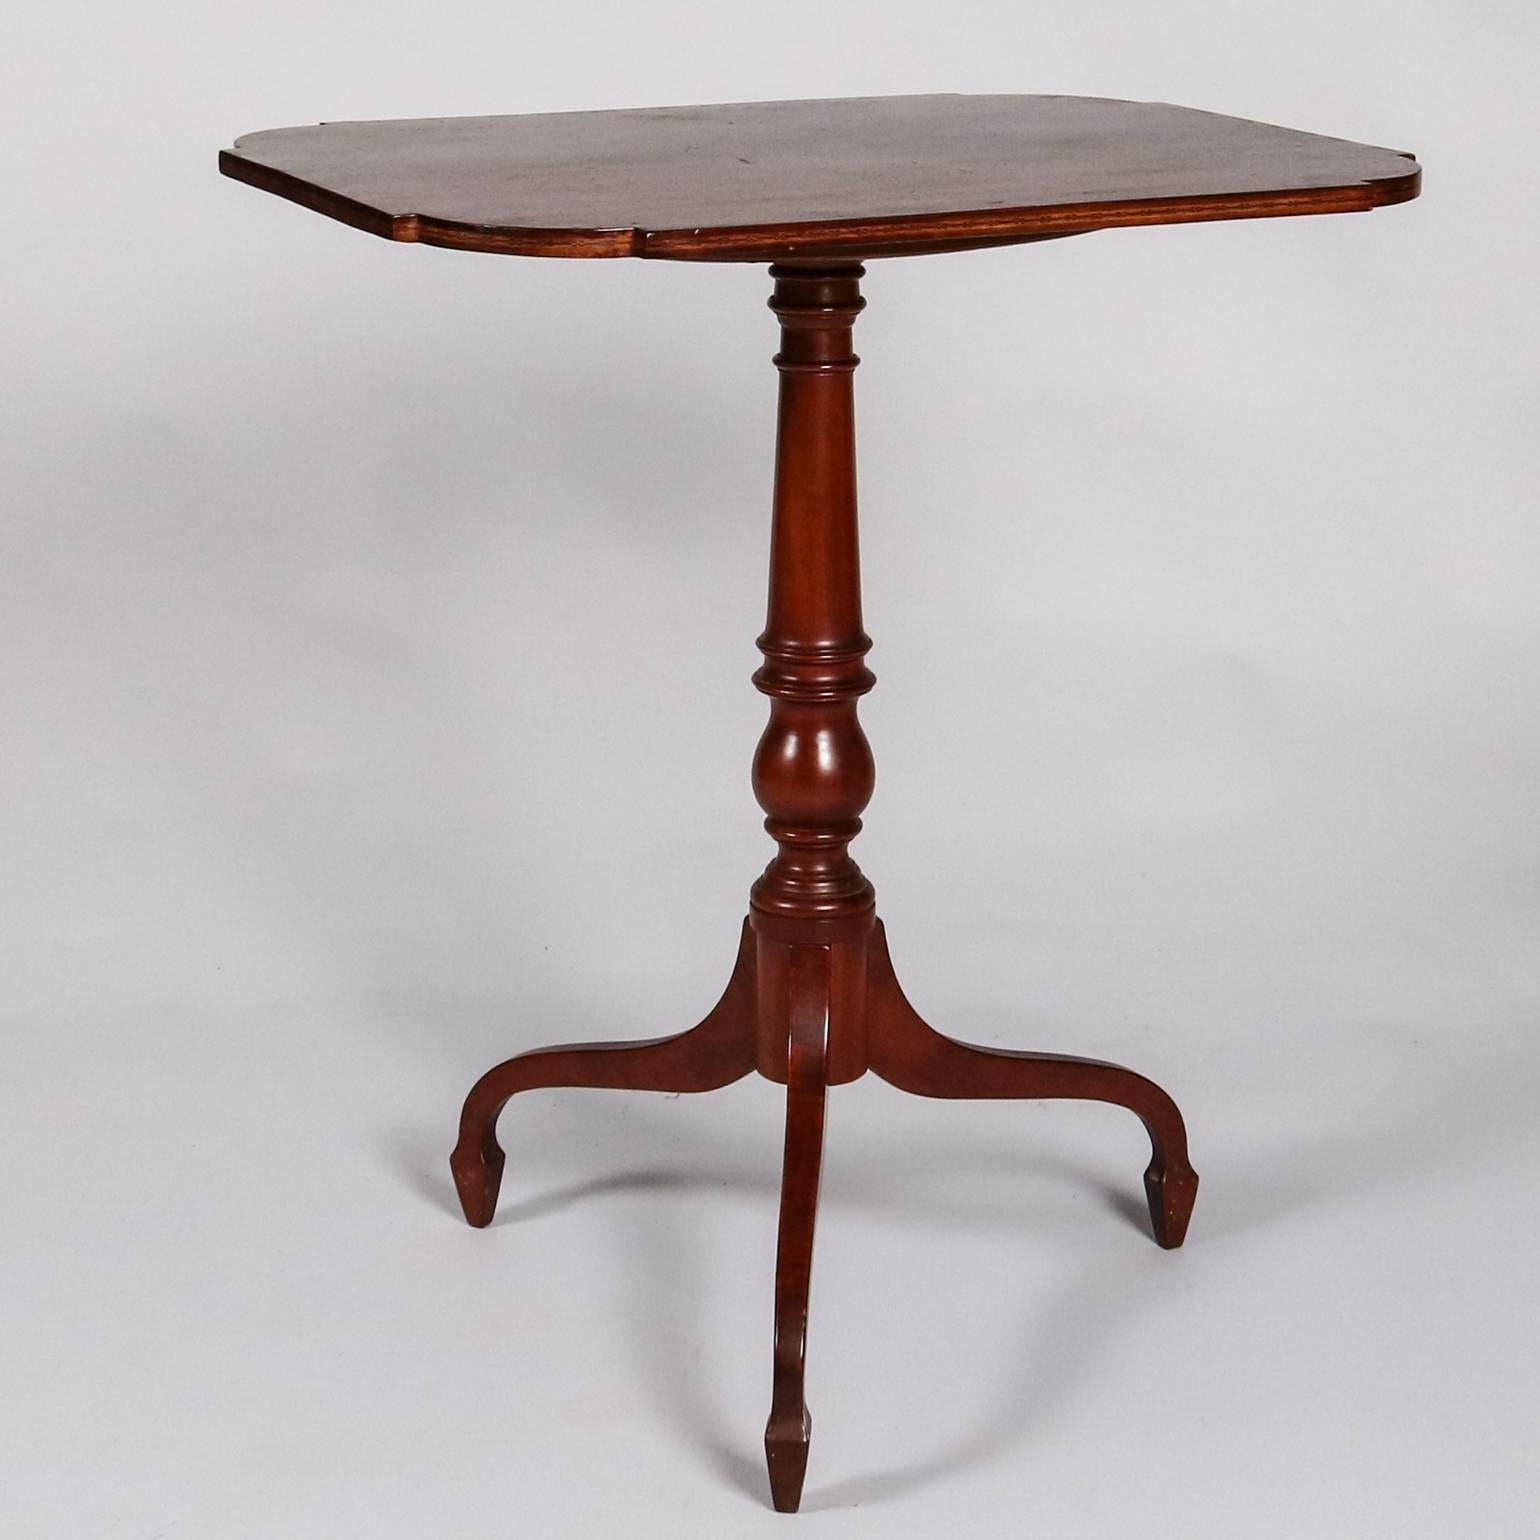 Antique Federal mahogany tilt-top table features spider tripod legs and spade feet, turned column and tilt top, 19th century

Measures: 27.5" H x 24" W x 18" D.